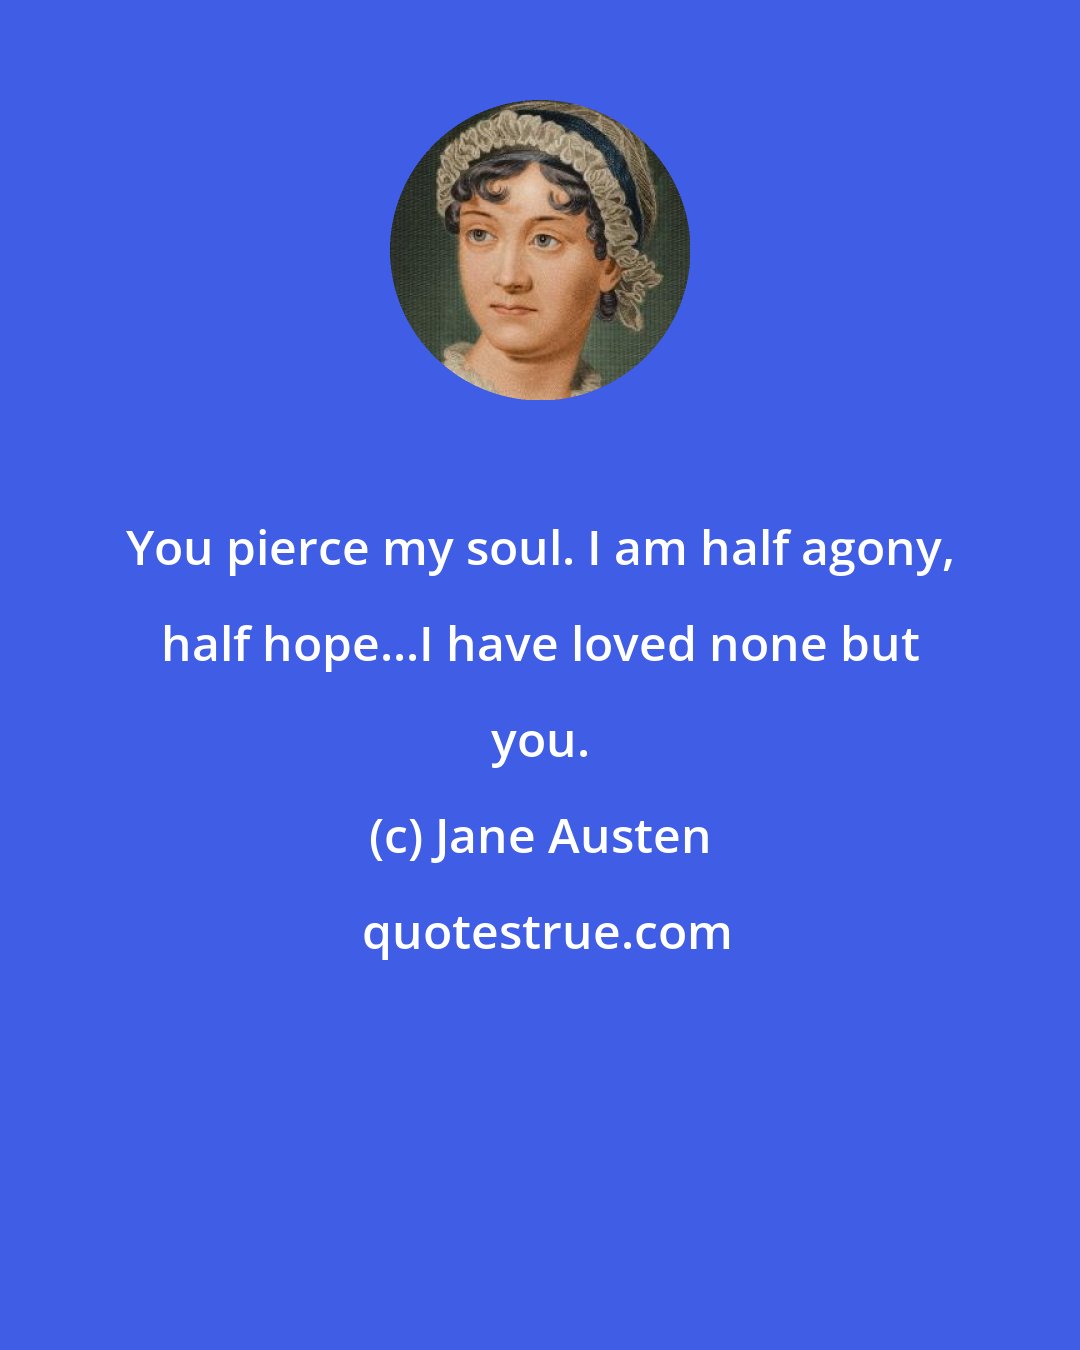 Jane Austen: You pierce my soul. I am half agony, half hope...I have loved none but you.